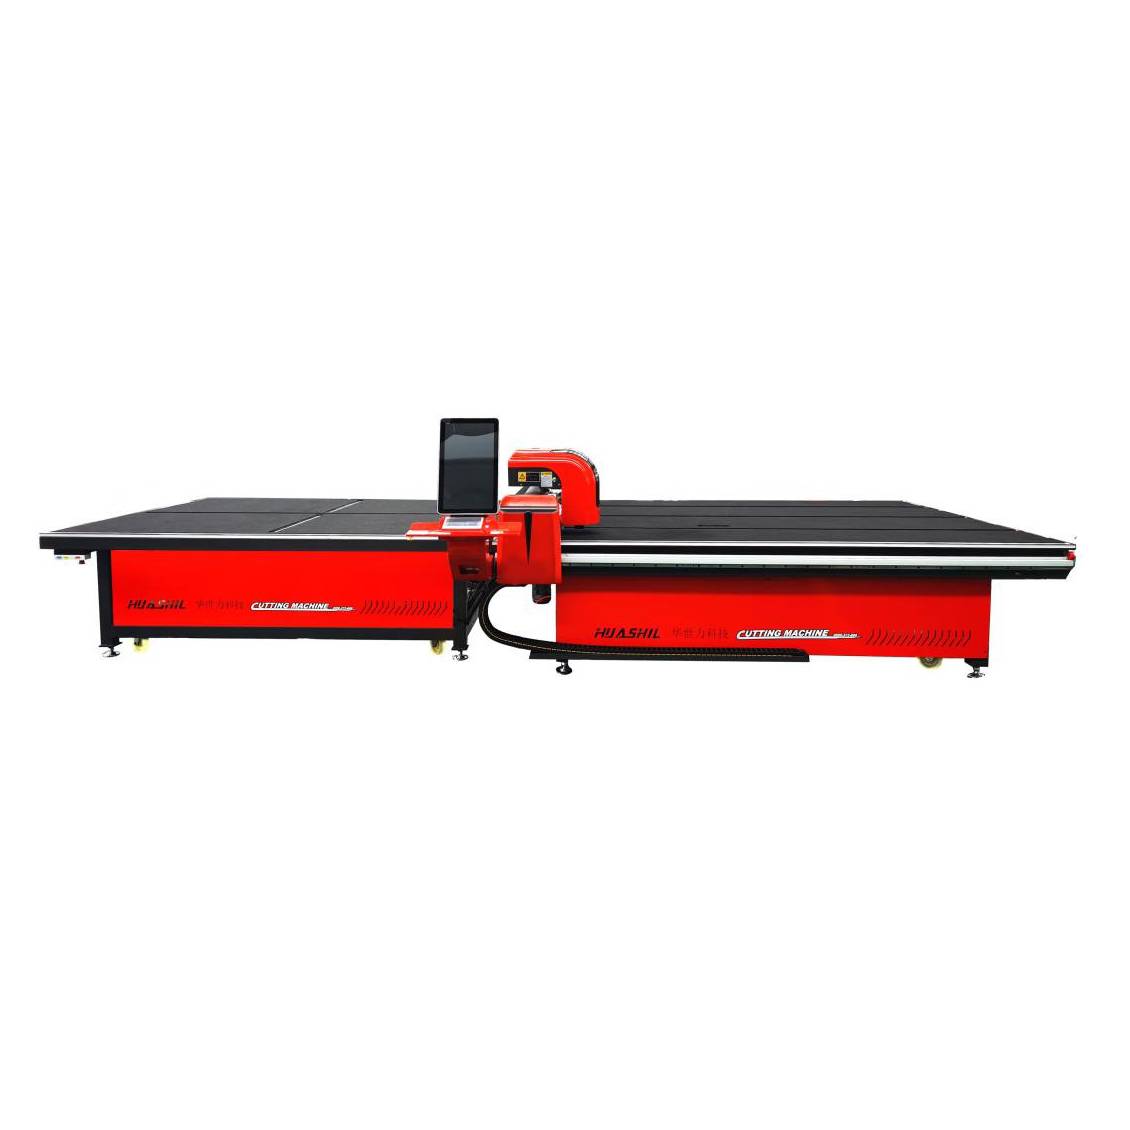 How to choose the sintered stone 45 degree edging machine?